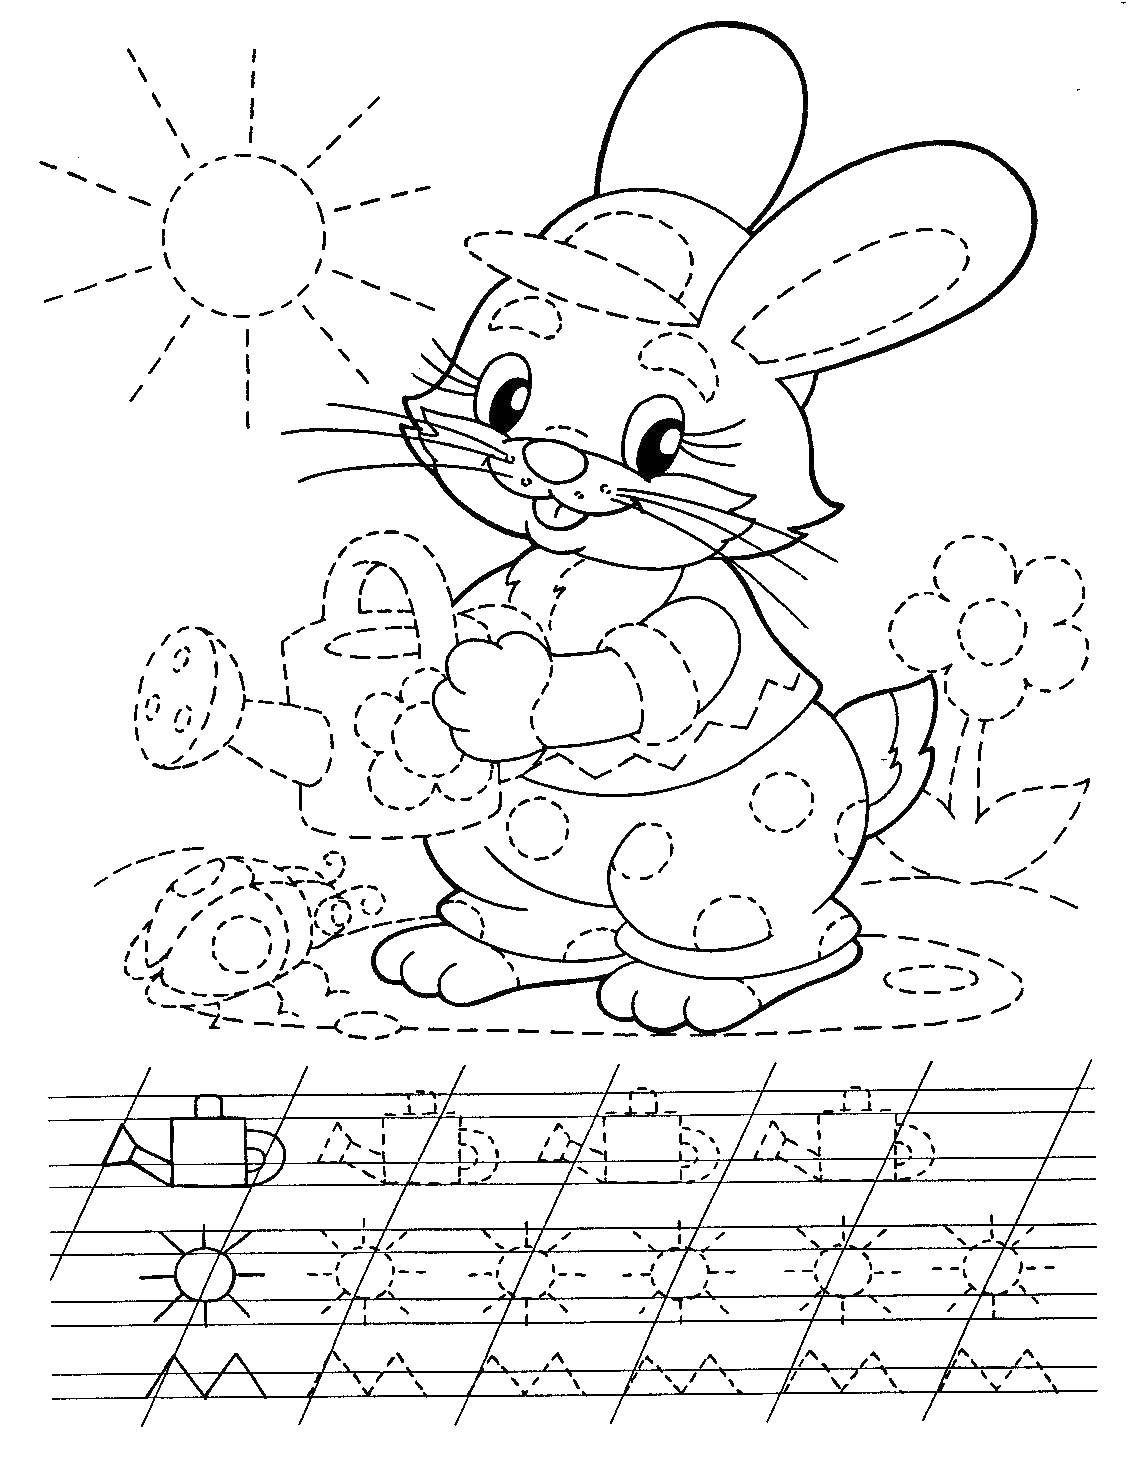 Coloring Bunny. Category Tracing. Tags:  curly, cursive;.